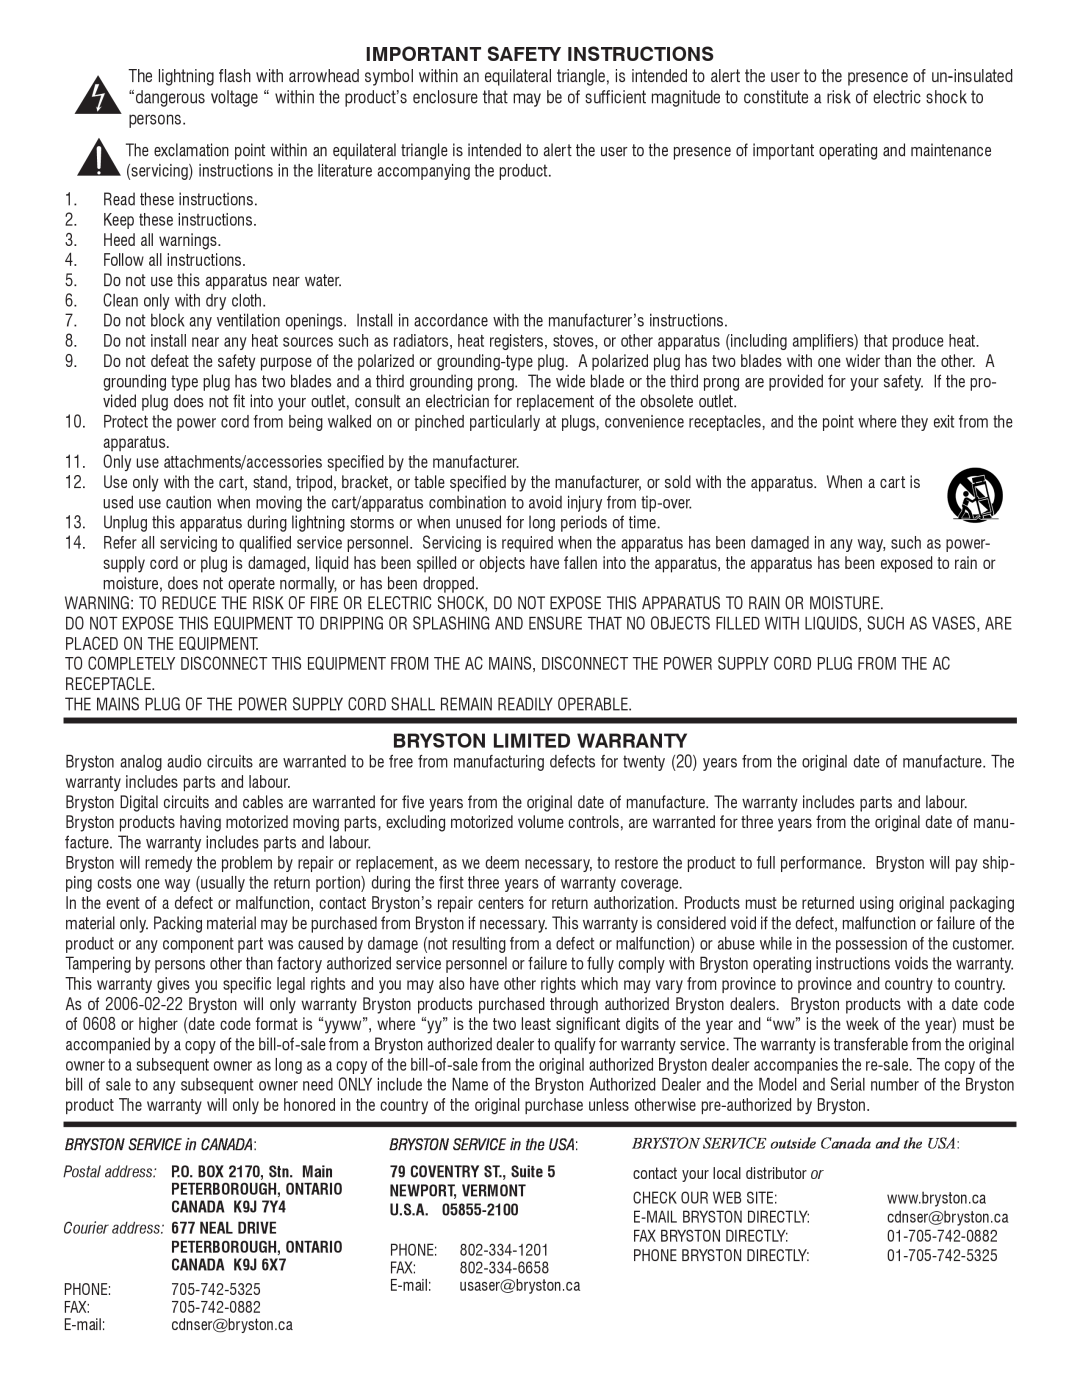 Bryston SP1.7 Series manual Important Safety Instructions, Bryston Limited Warranty 